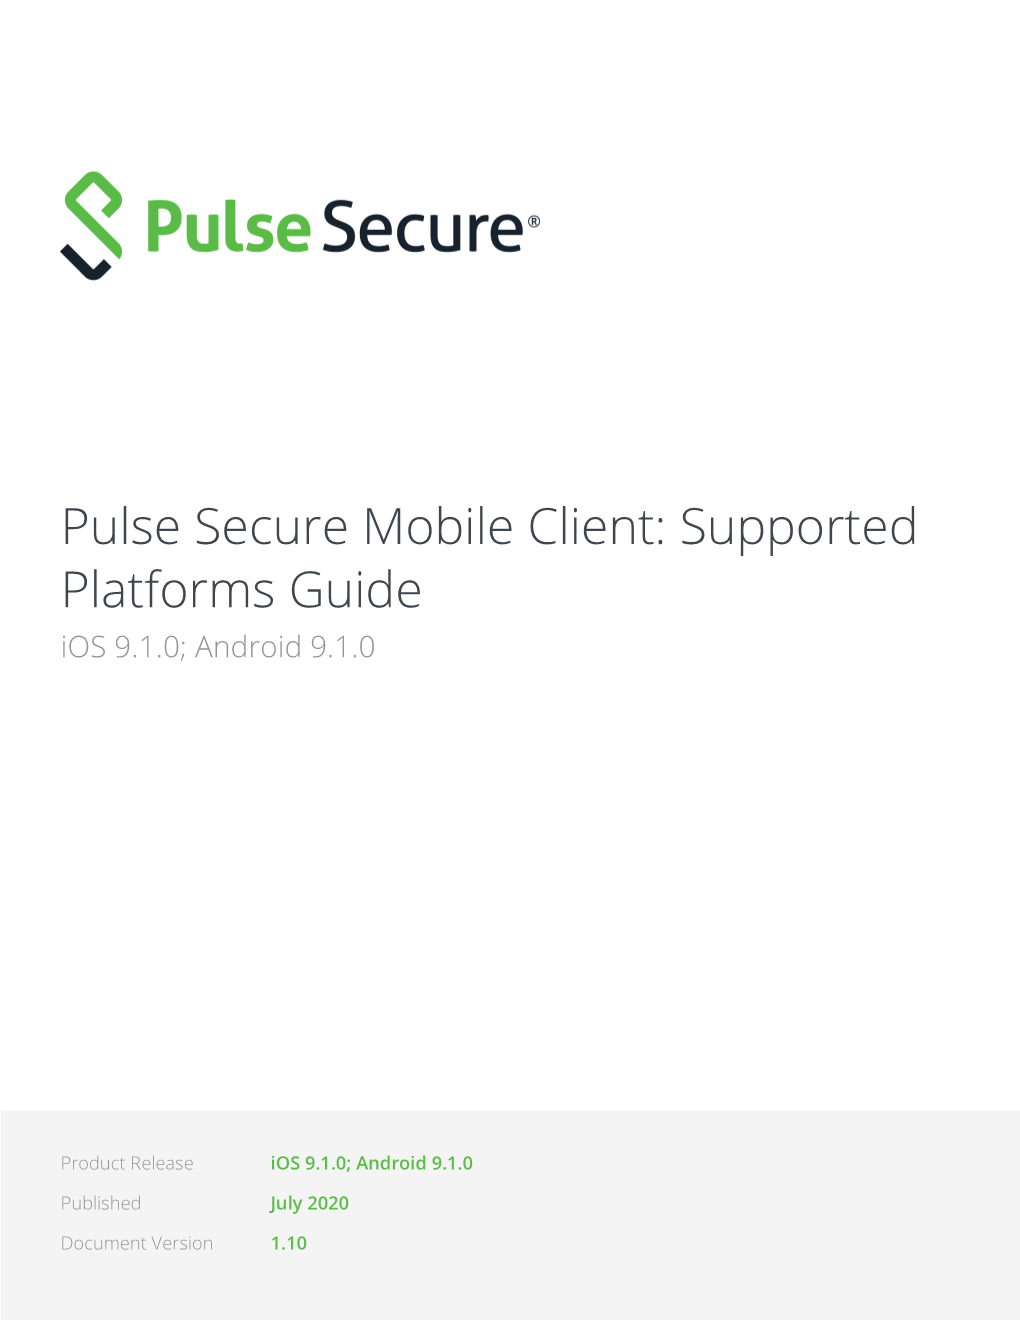 Pulse Secure Mobile Client Supported Platforms Guide